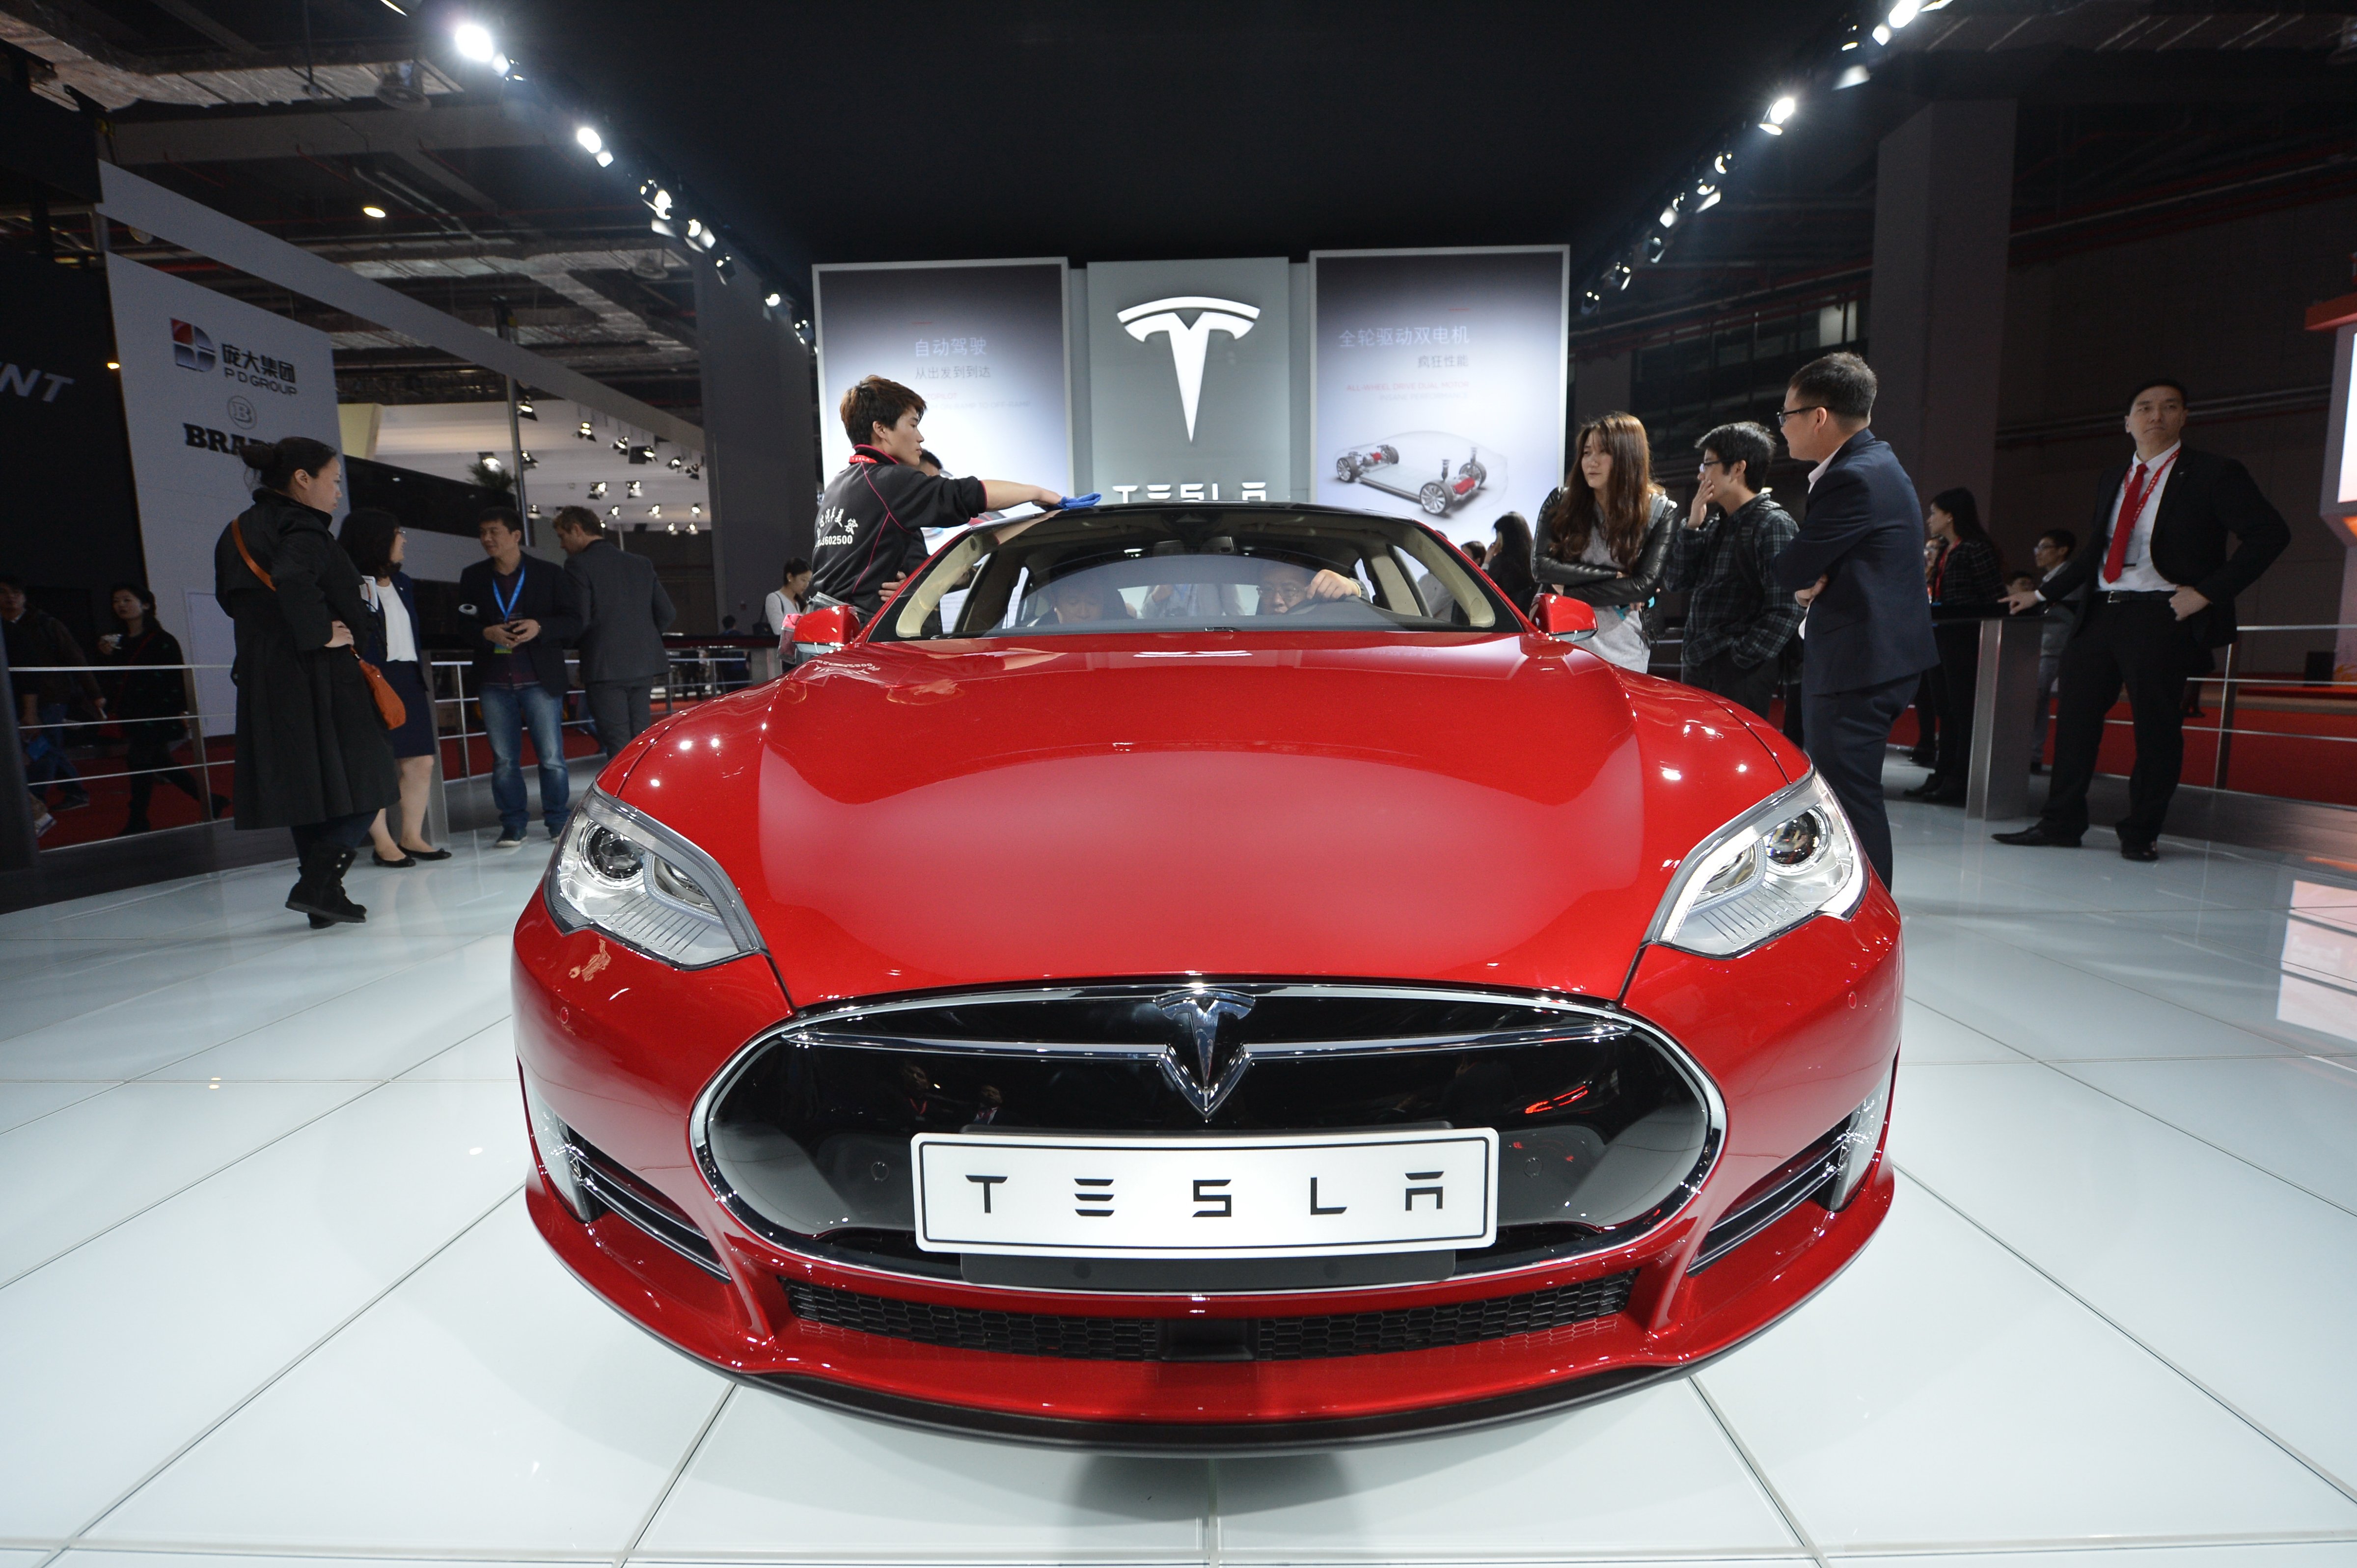 Tesla Model S electric car on display at the 16th Shanghai International Automobile Industry Exhibition in Shanghai on April 20, 2015.